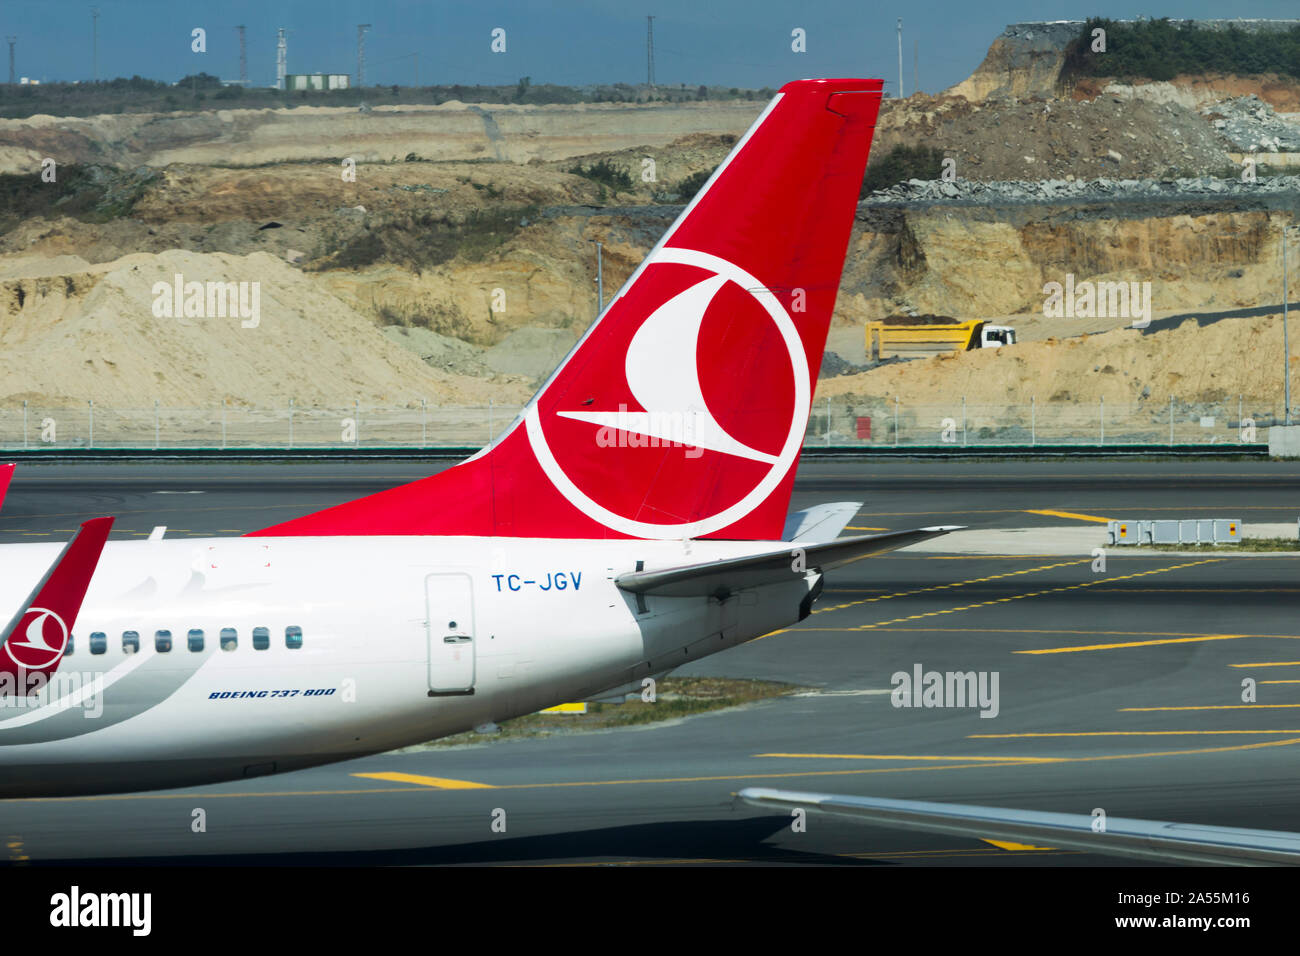 Istanbul International Airport, Turkey, August 11th, 2019: Turkish airlines jet TC-JGV on the runway and ongoing construction in the background. Stock Photo